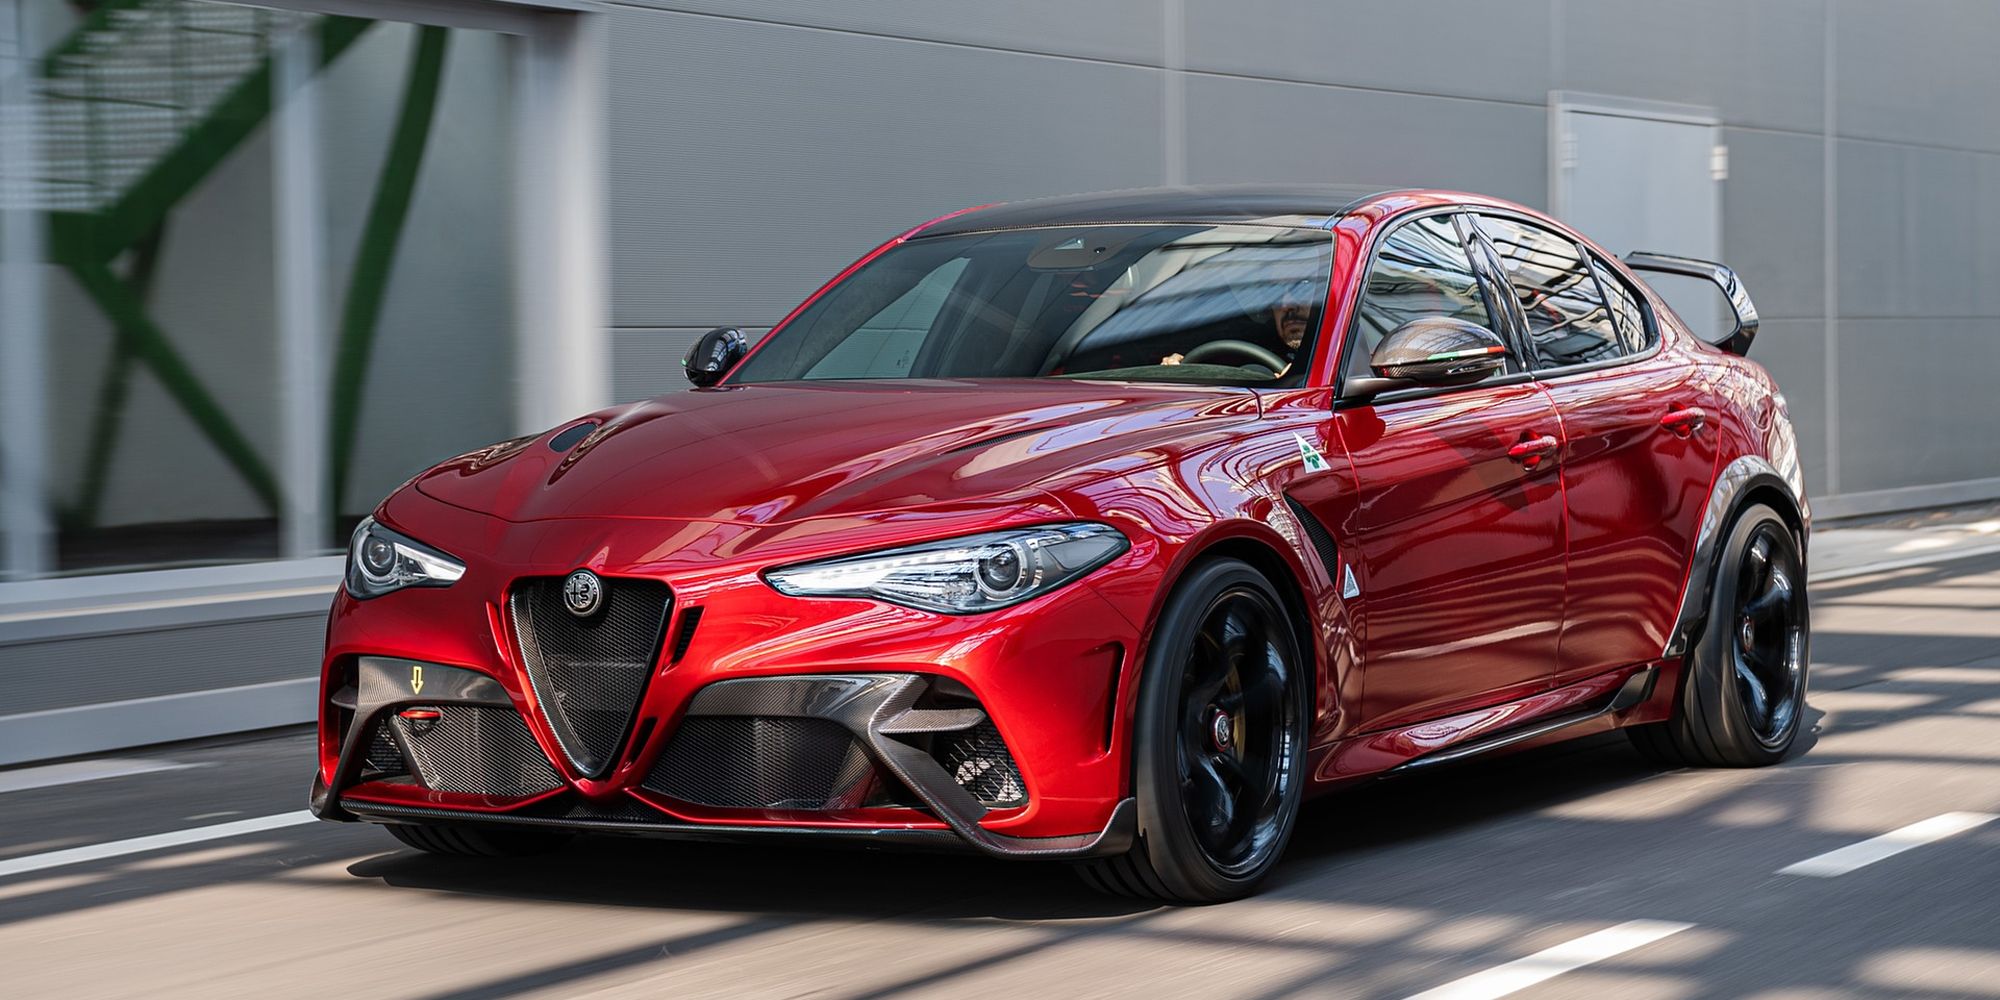 The front of the Giulia GTAm